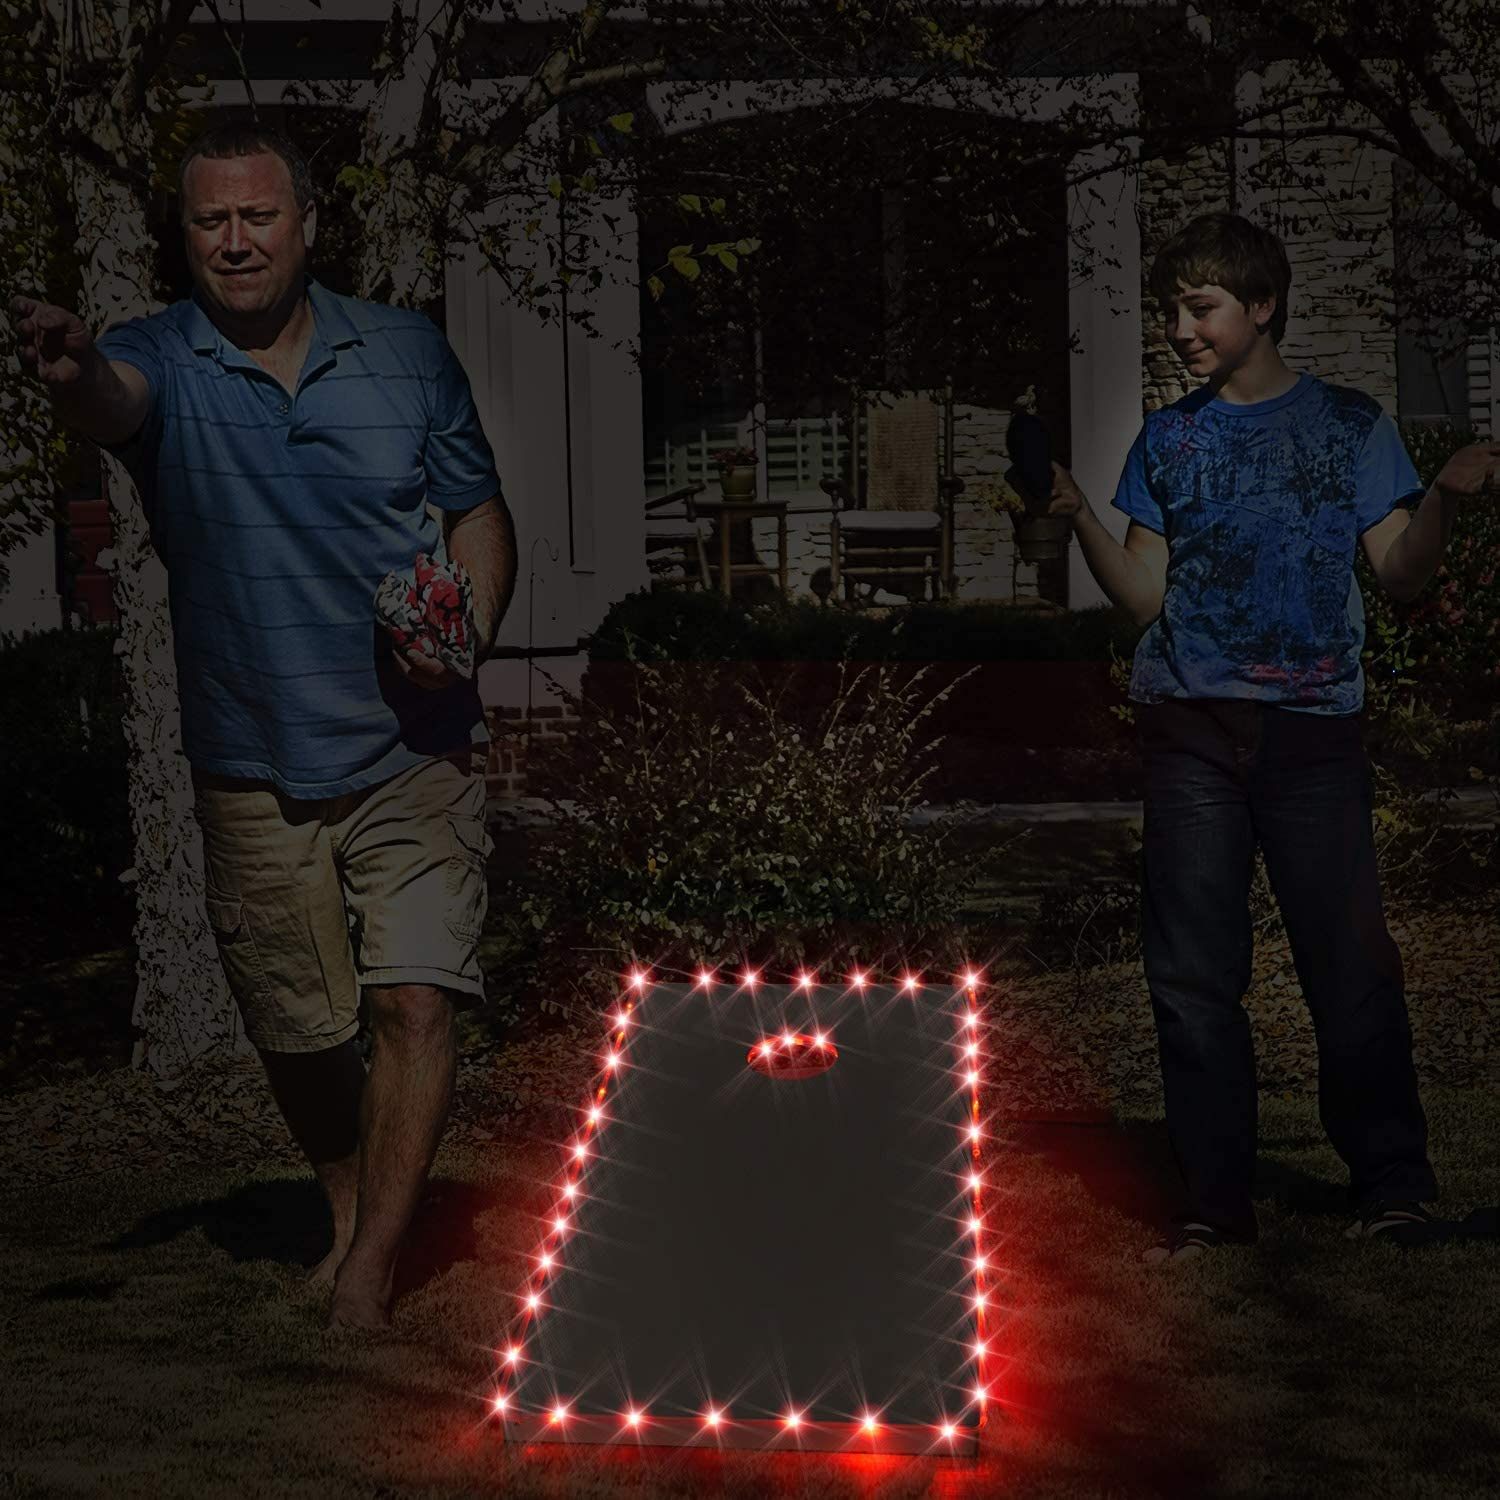 LED Cornhole Lights, Remote Control Cornhole Board Edge and Ring LED Lights, 16Color change by yourself, a great addition for playing Bean Bag Toss Cornhole game at the family backyard at night